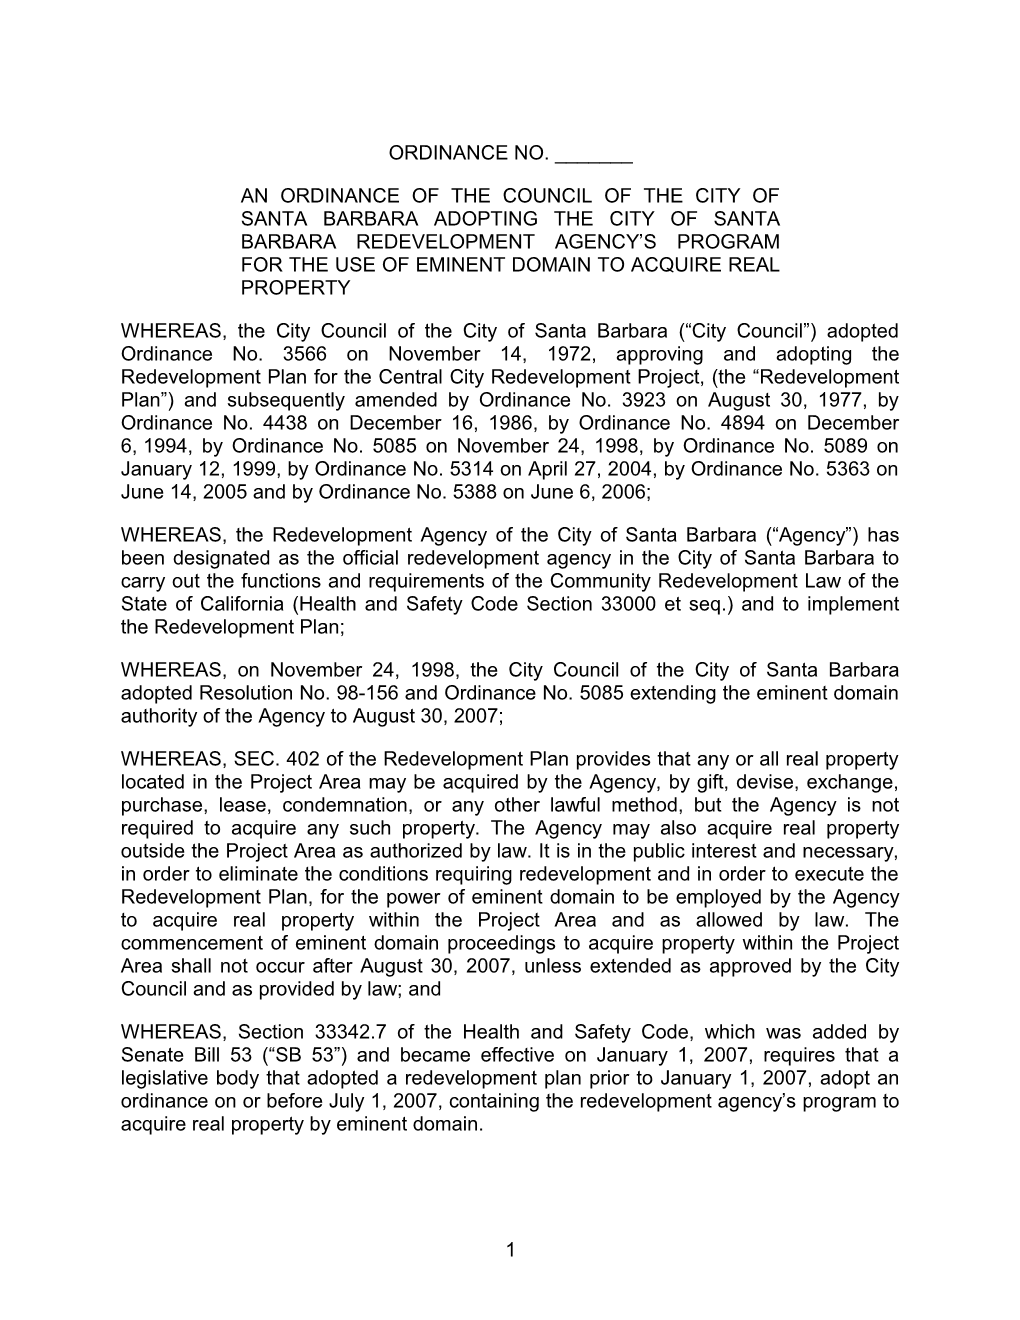 An Ordinance of the Council of the City of Santa Barbara Adopting the City of Santa Barbara